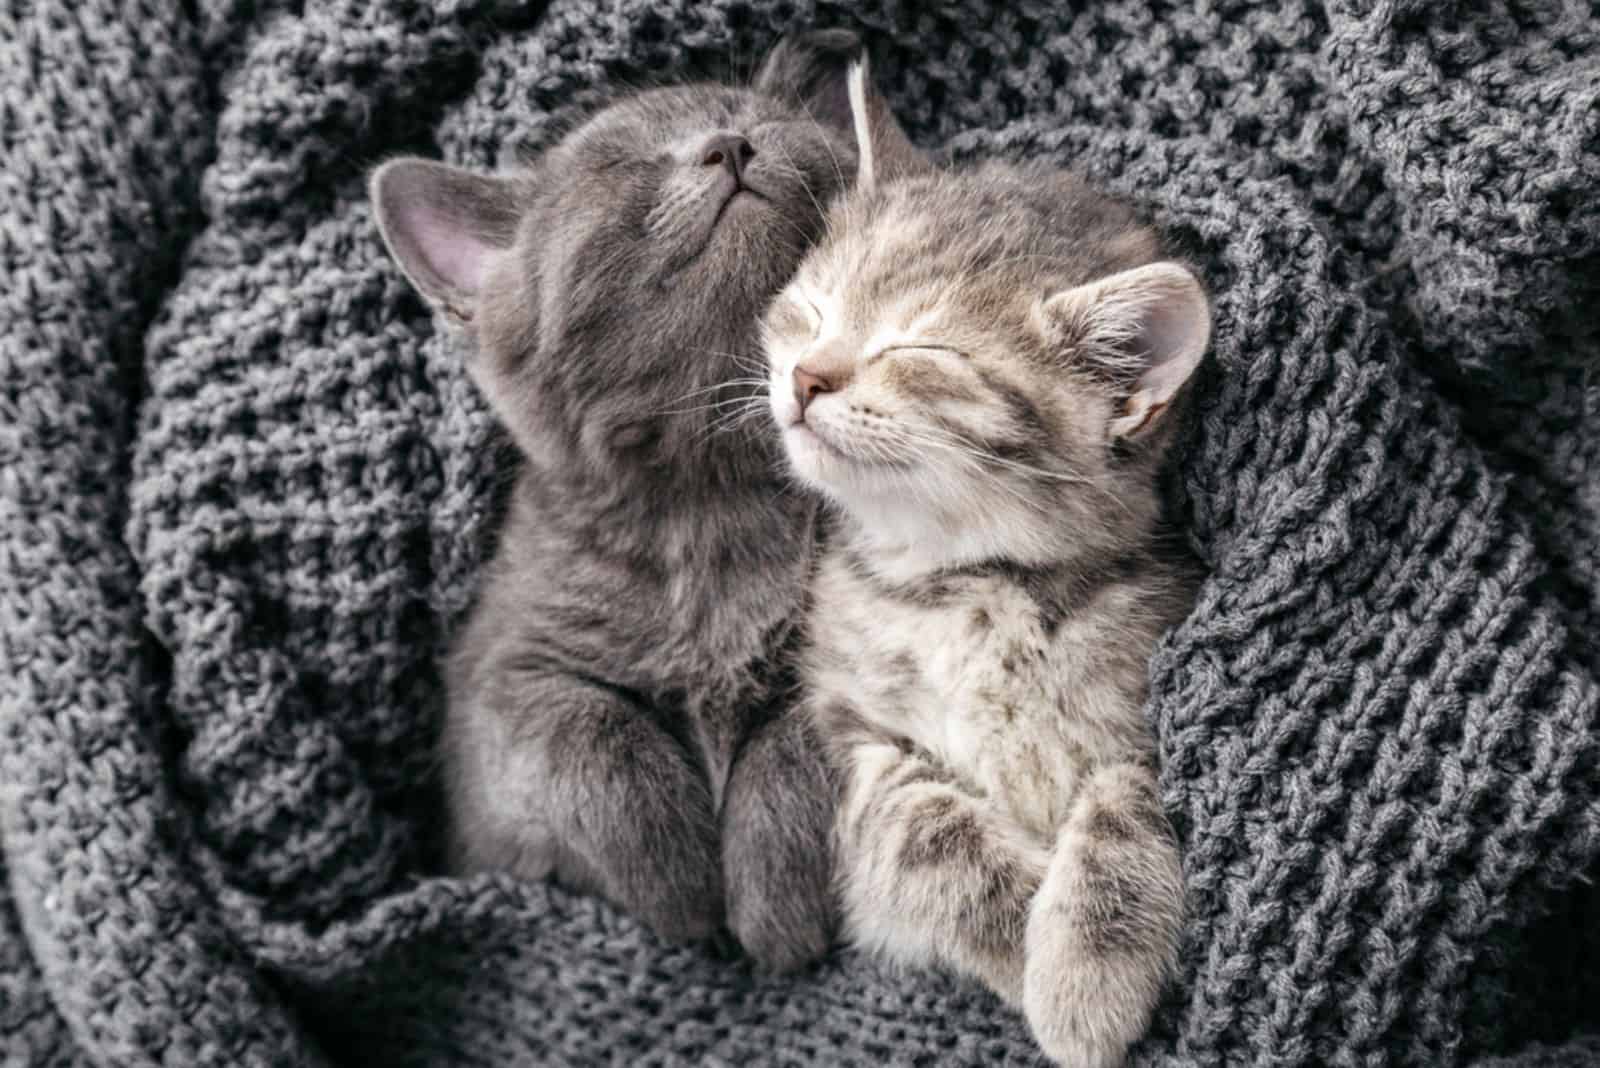 two cute British Shorthair kittens wrapped in a blanket